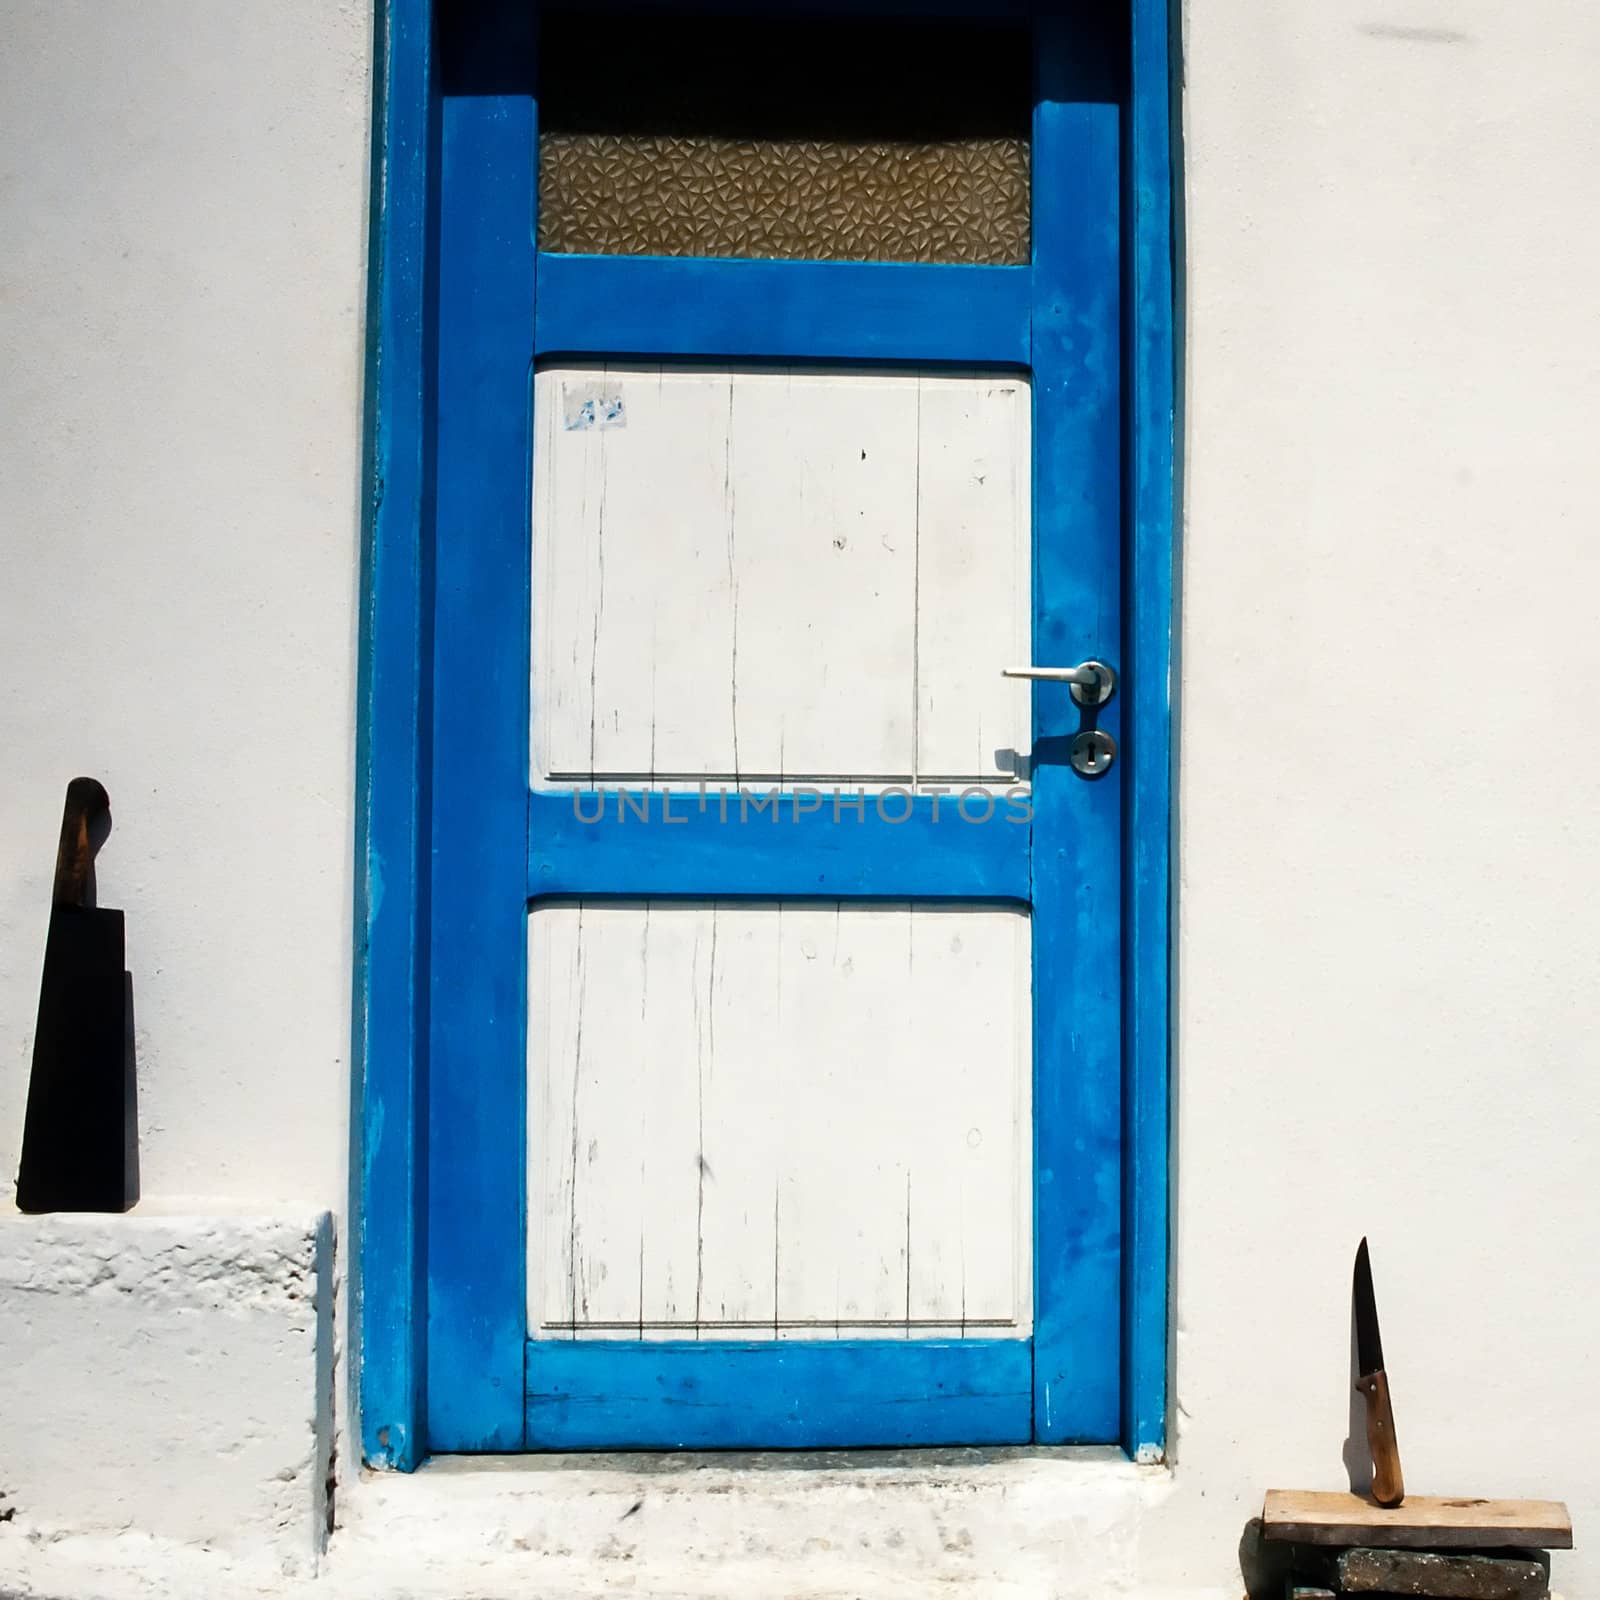 Traditionally painted front door in Greek town with butcher knifes placed to dry in sun.